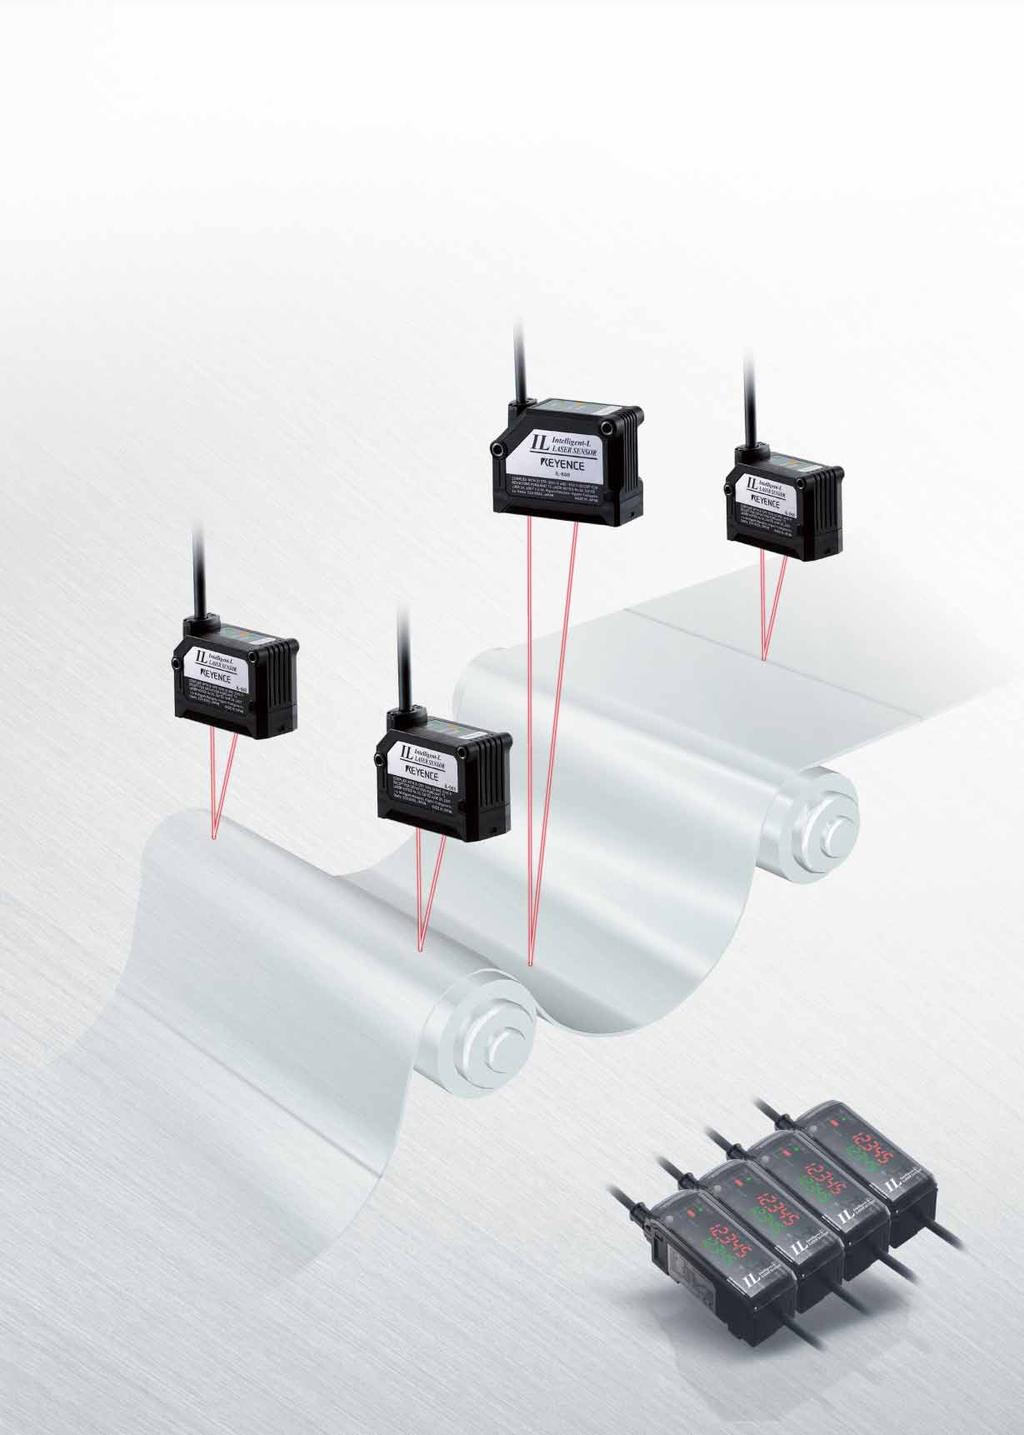 NEW CMOS Multi-Function Analogue Laser Sensor IL Series A wide lineup of measurement ranges capable of solving many applications, from part differentiation to high precision measurement Seam